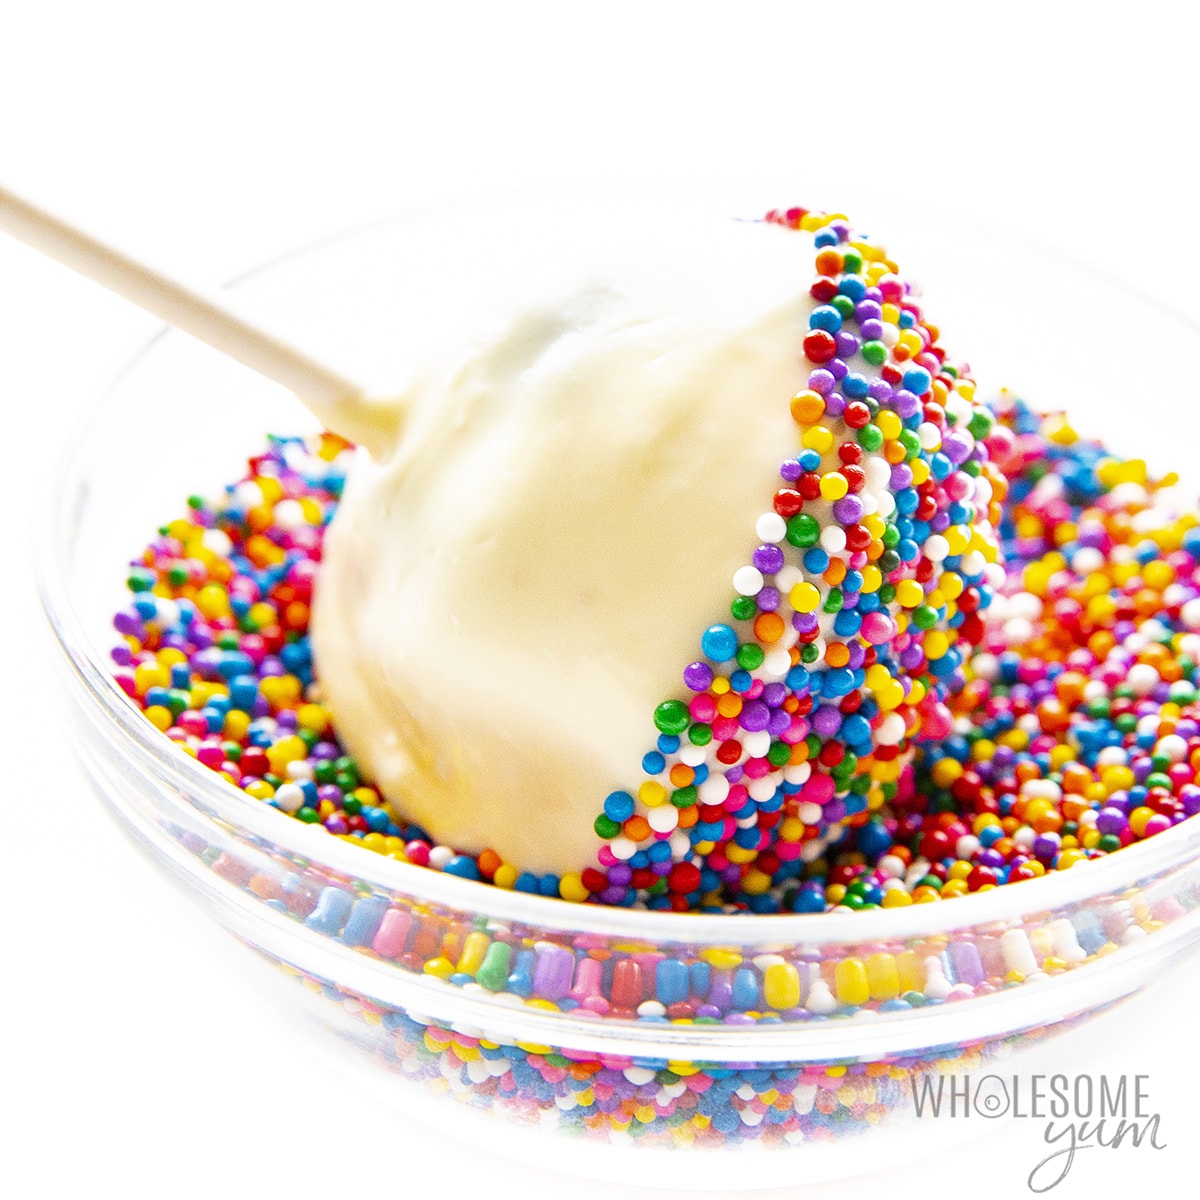 Cake pops with dip and sprinkles.